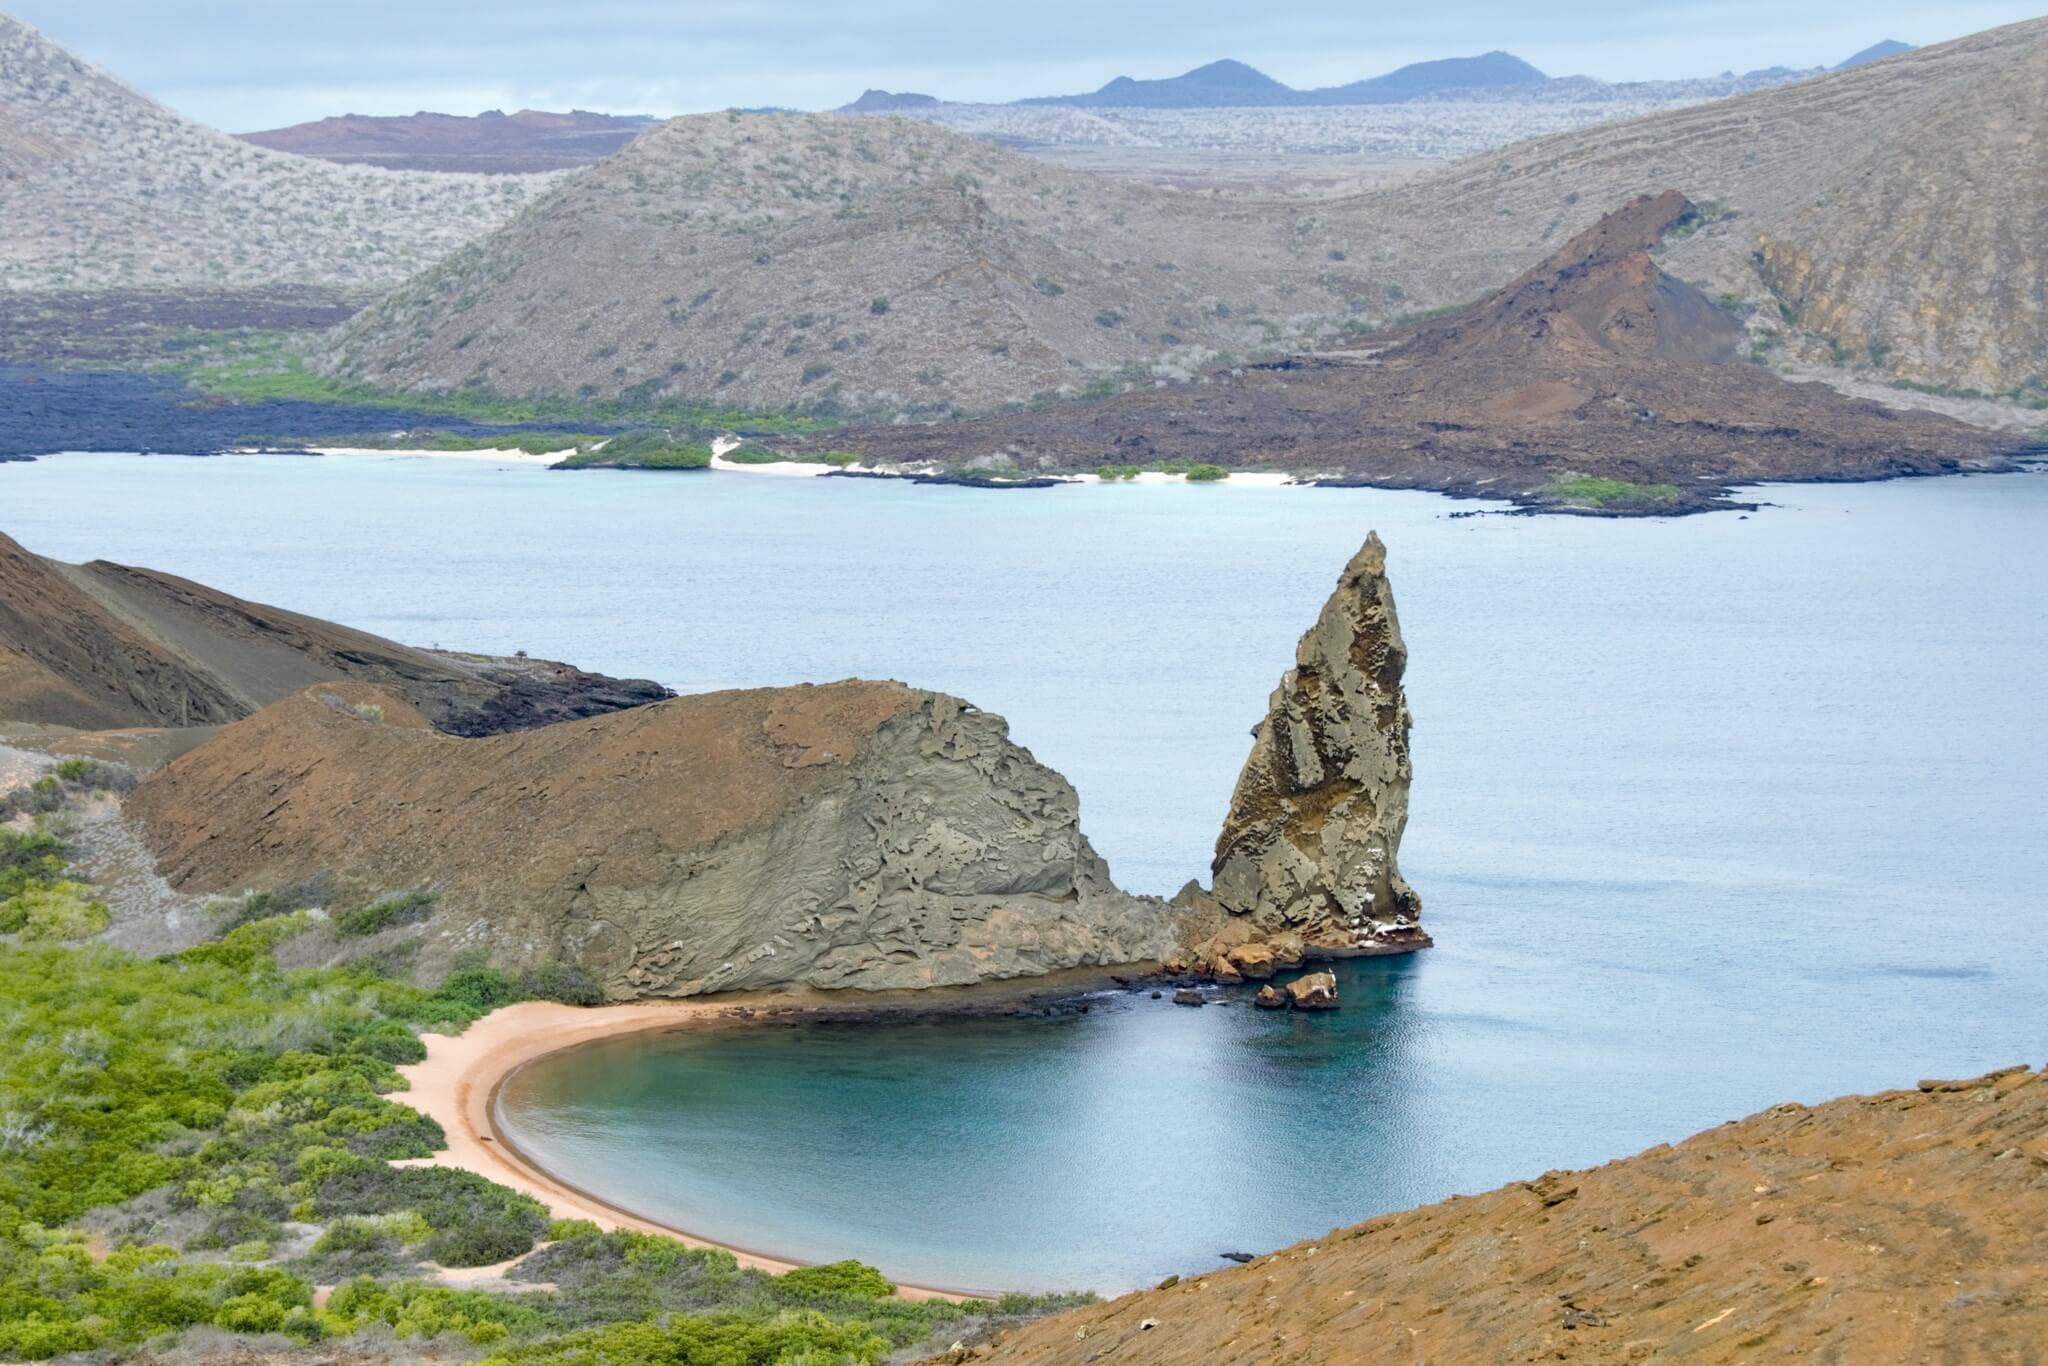 a panoramic view of the Galapagos coast.